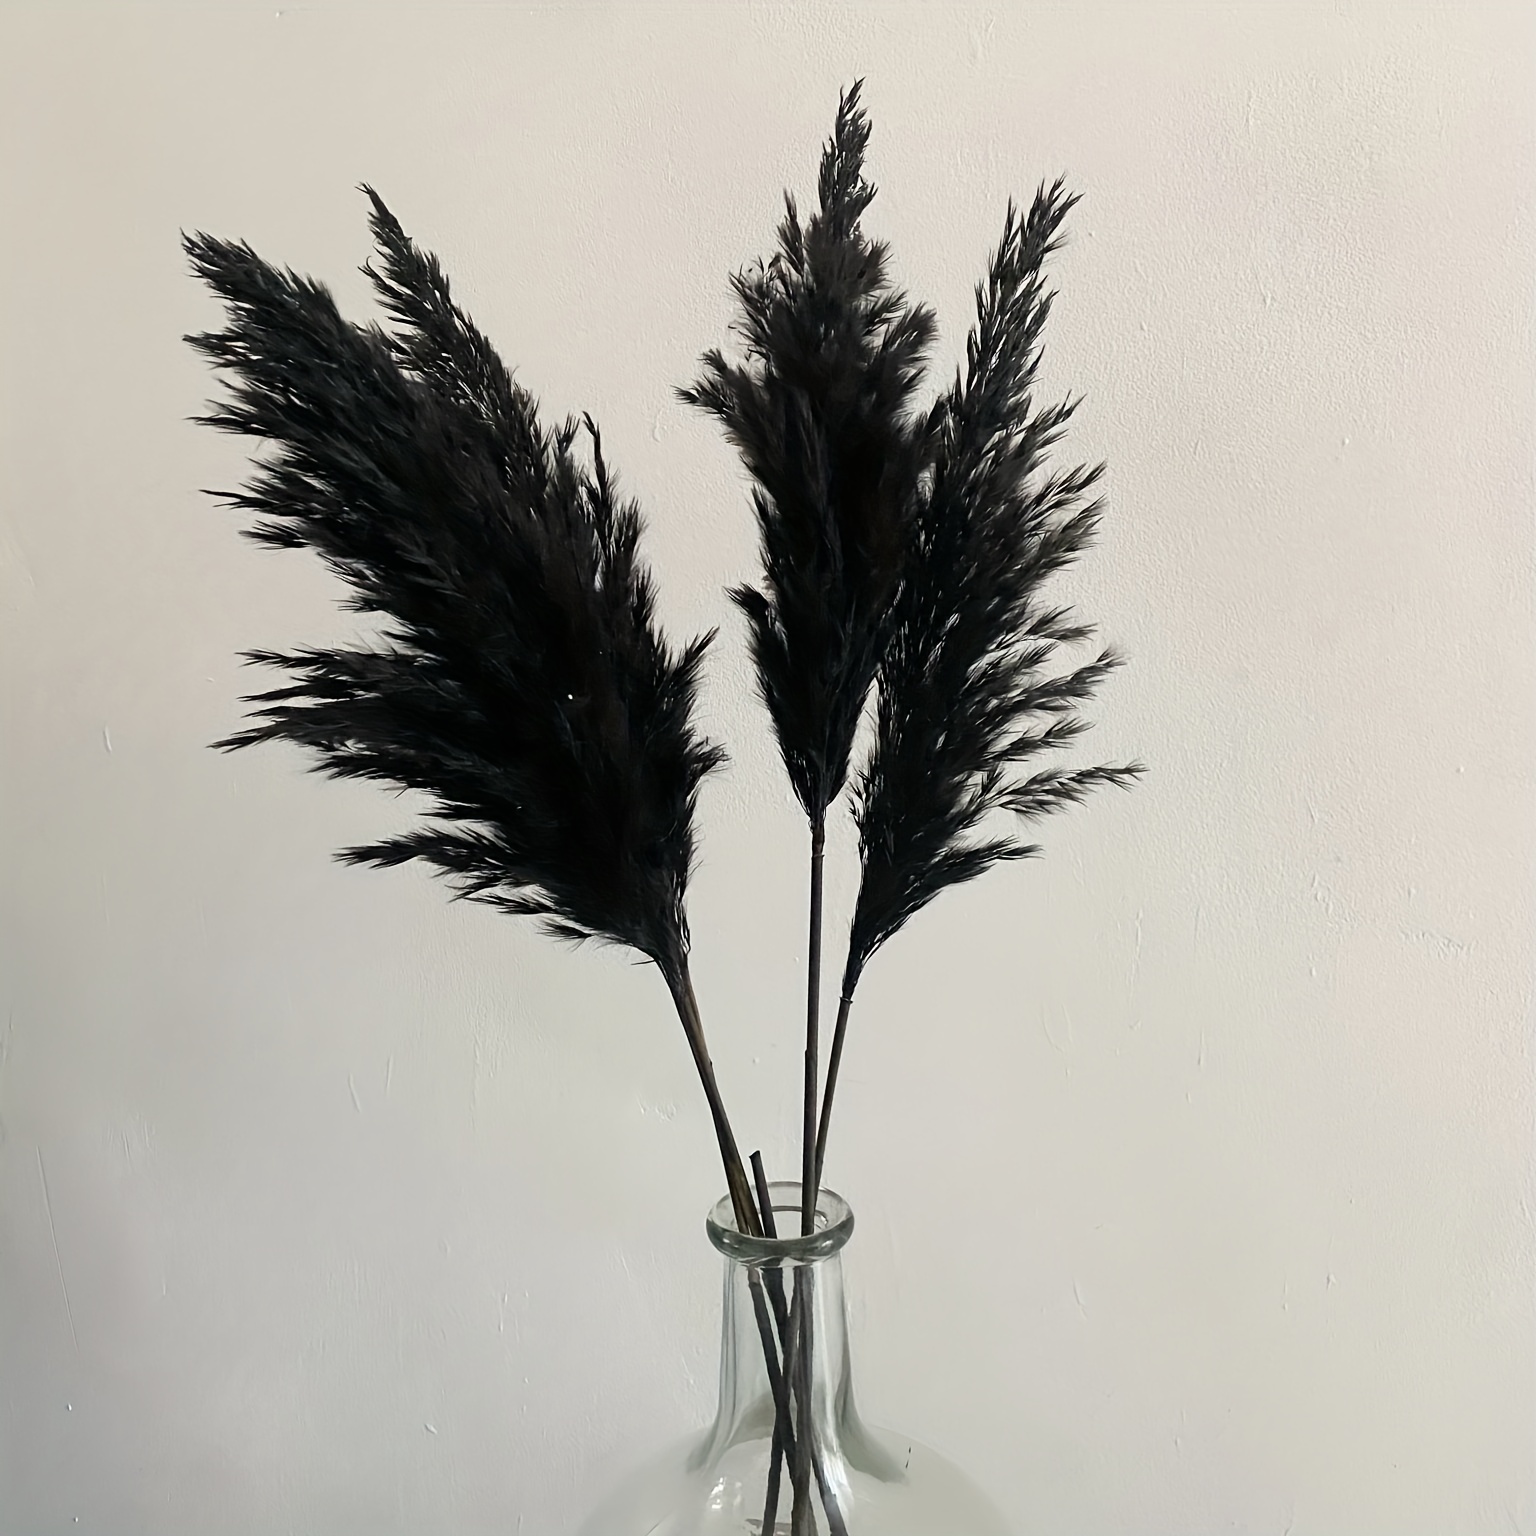 40PCS Black Pampas Grass Decor for Table Room Nature Dried Flowers